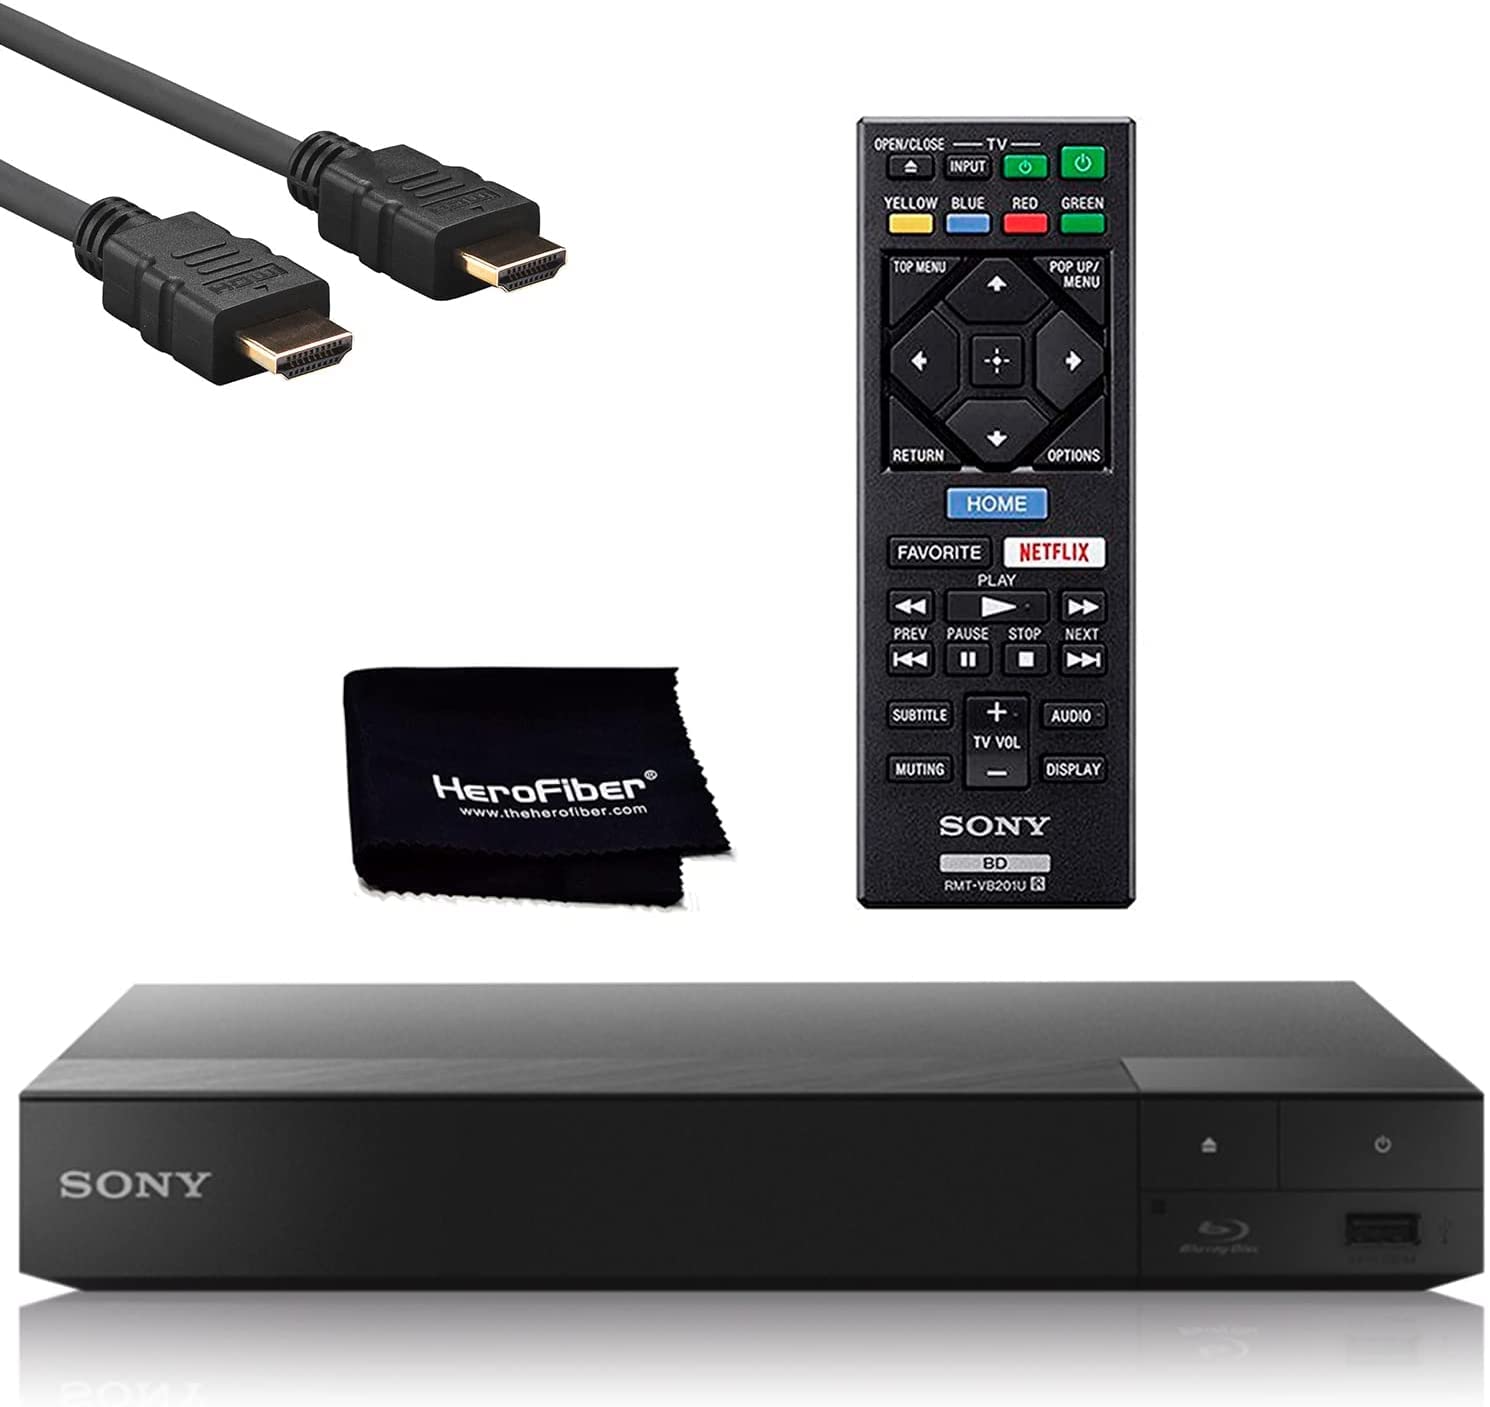 HeroFiber Bundle: Sony BDP-S3700 Blu-Ray Disc Player With Built-In Wi-Fi + Remote Control + Xtech High-Speed HDMI Cable W/Ethernet + HeroFiber Gentle Cleaning Cloth